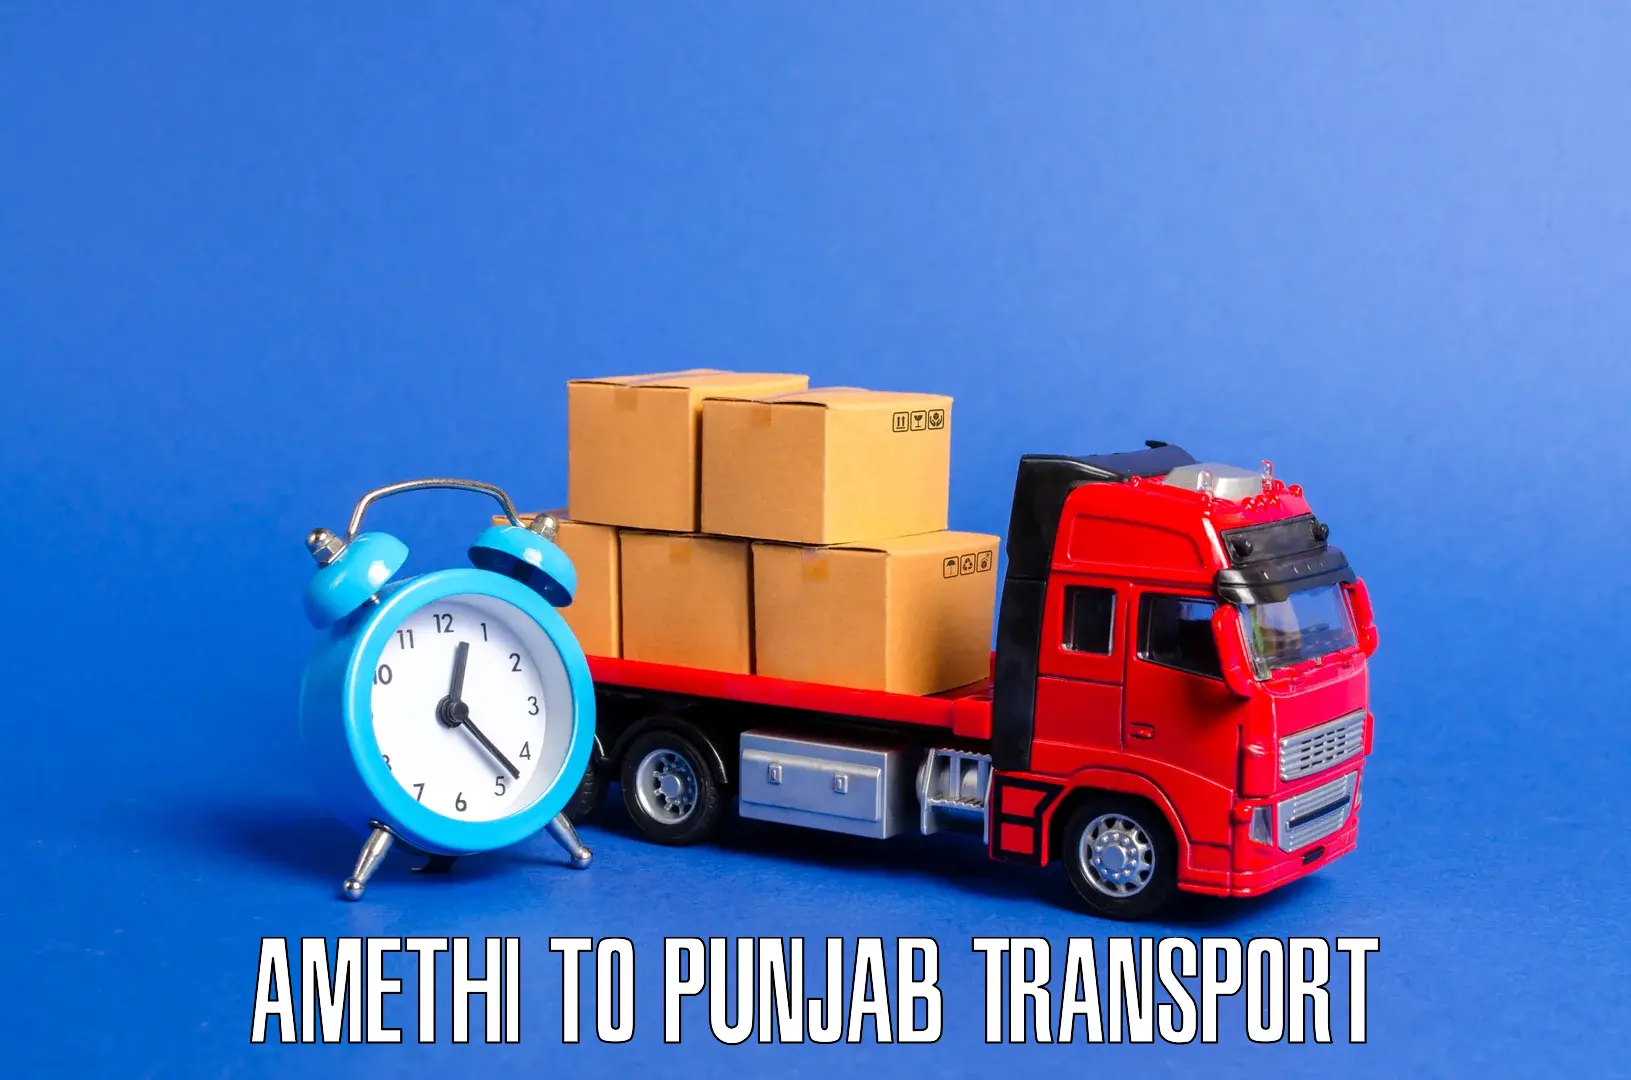 Parcel transport services Amethi to Ludhiana